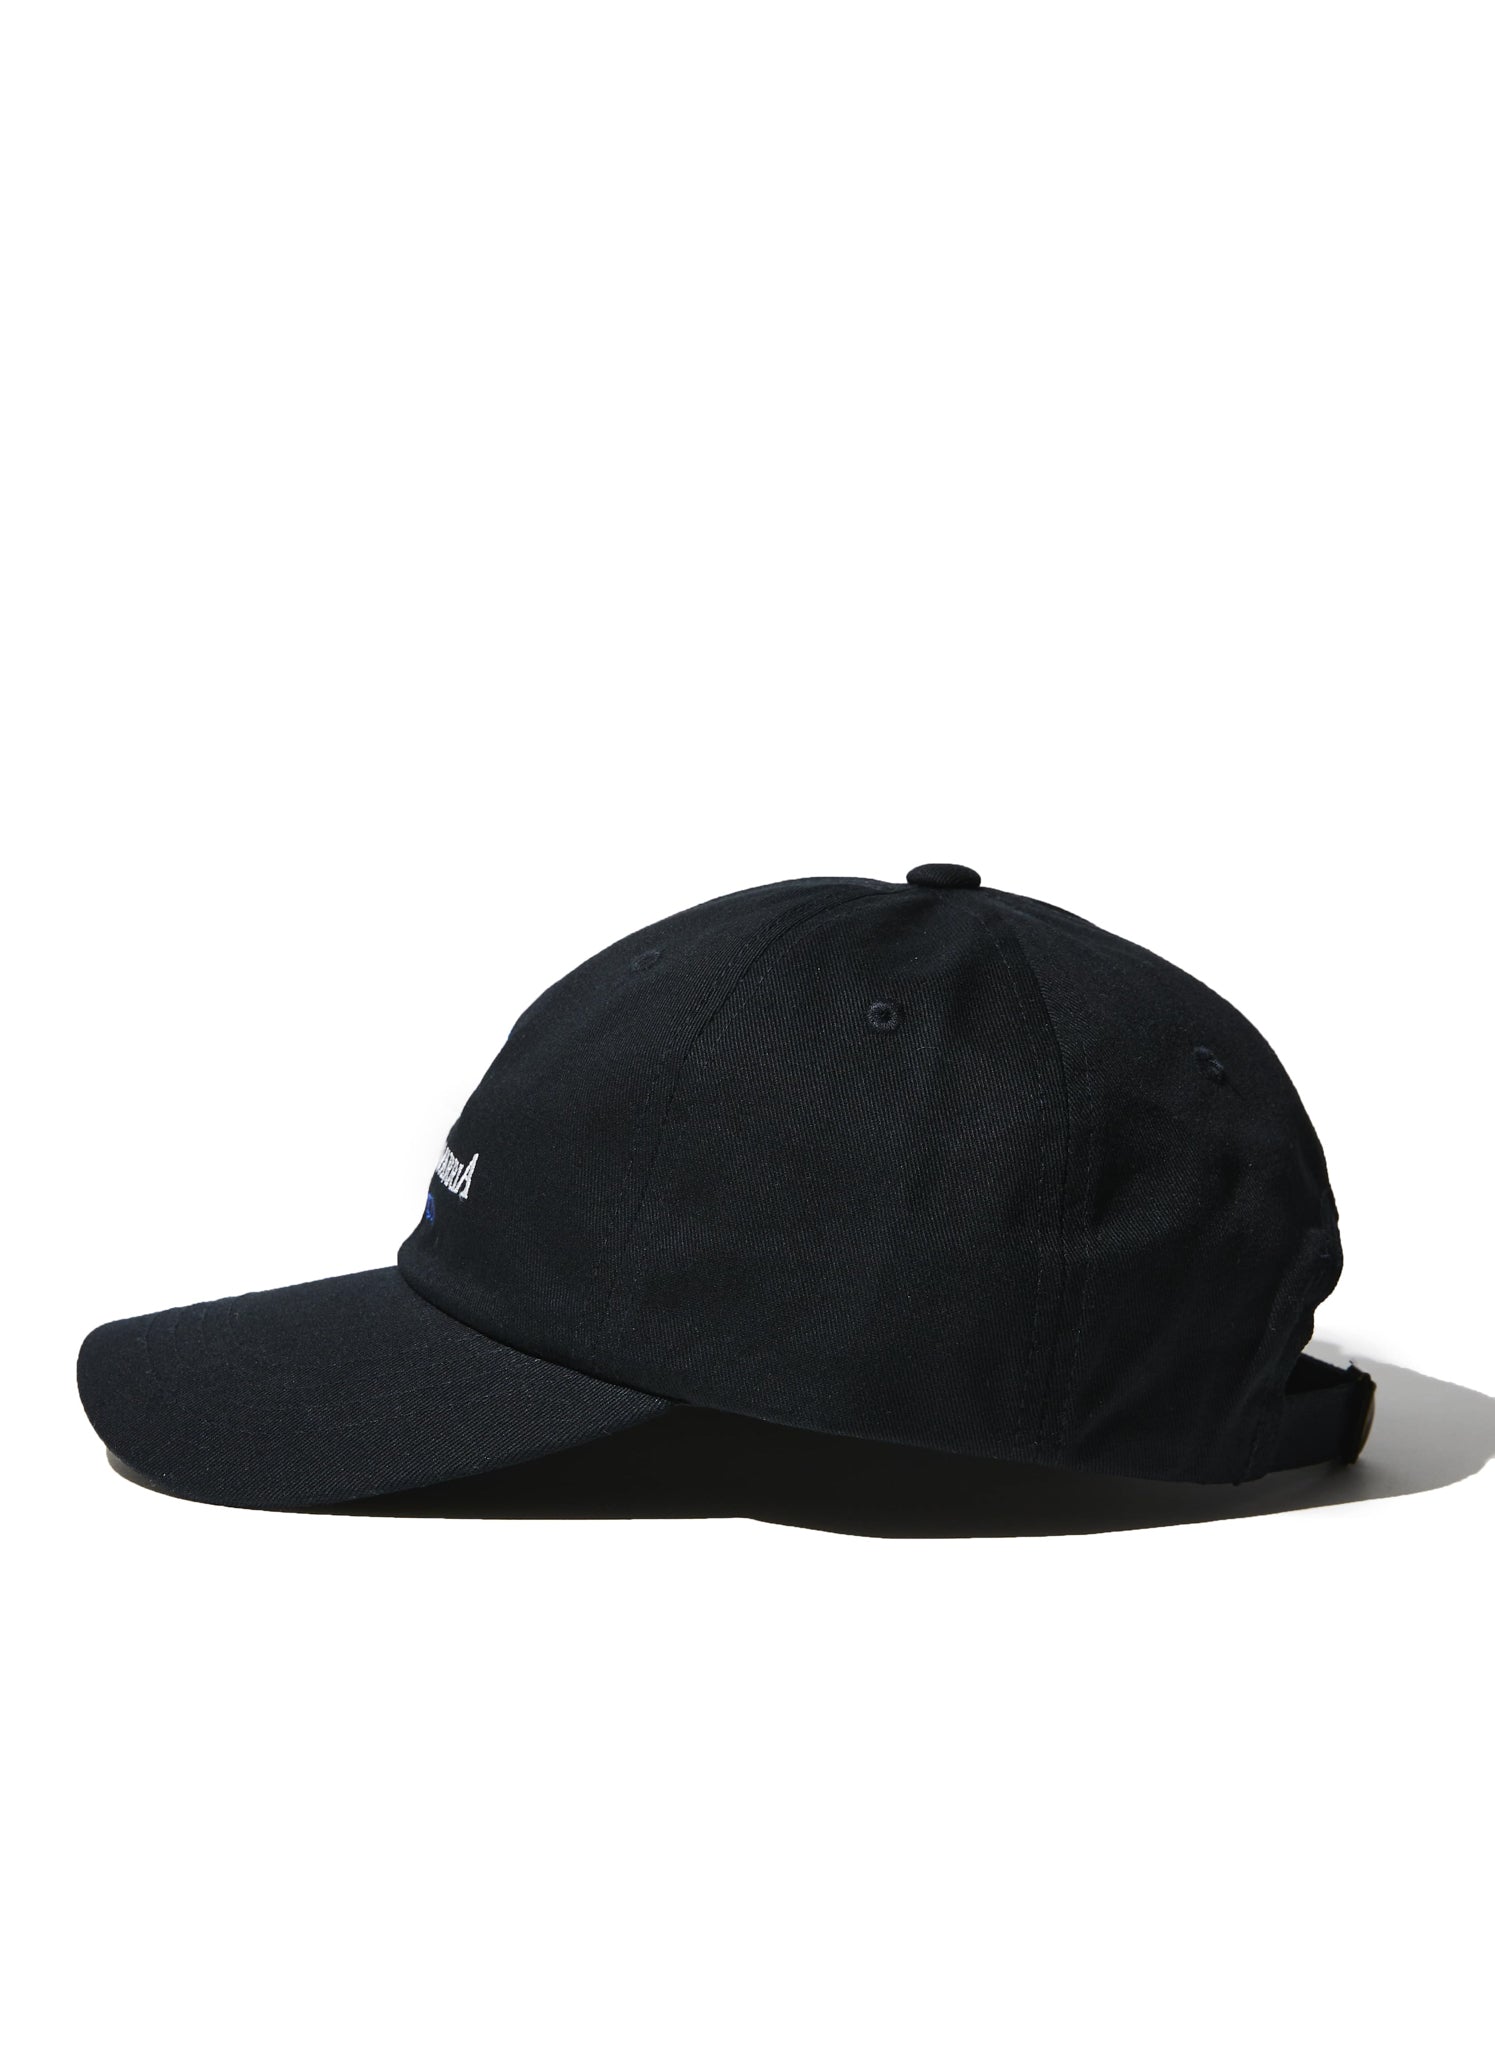 WILLY CHAVARRIA / WILLY CAP 02 BLACK